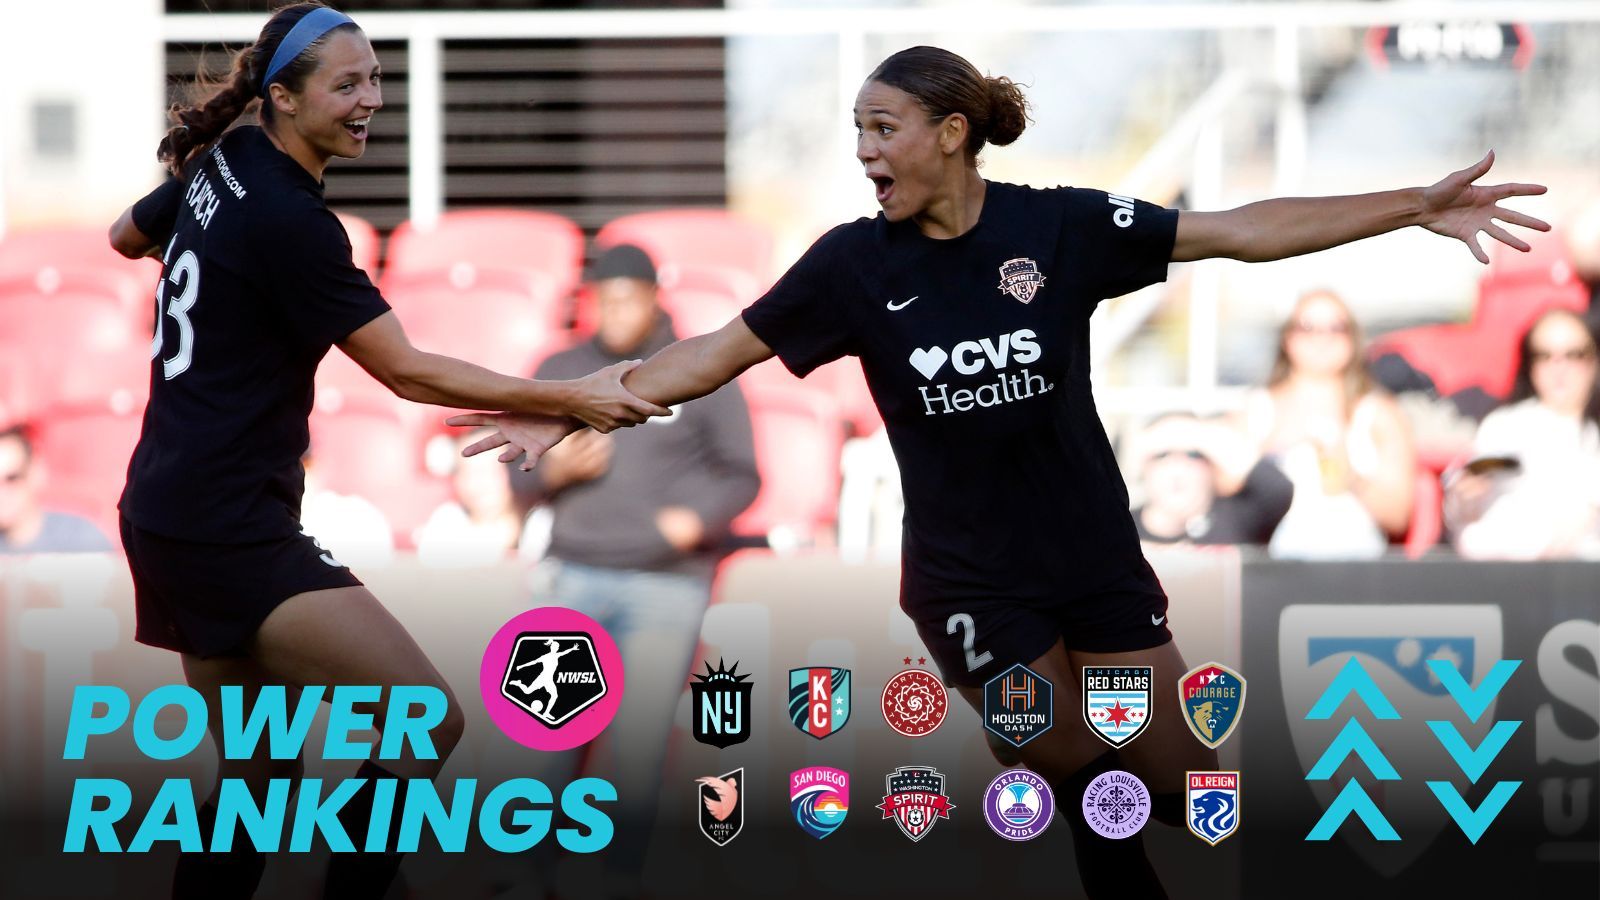 The 2023 Soccer League Rankings: Who's on Top?